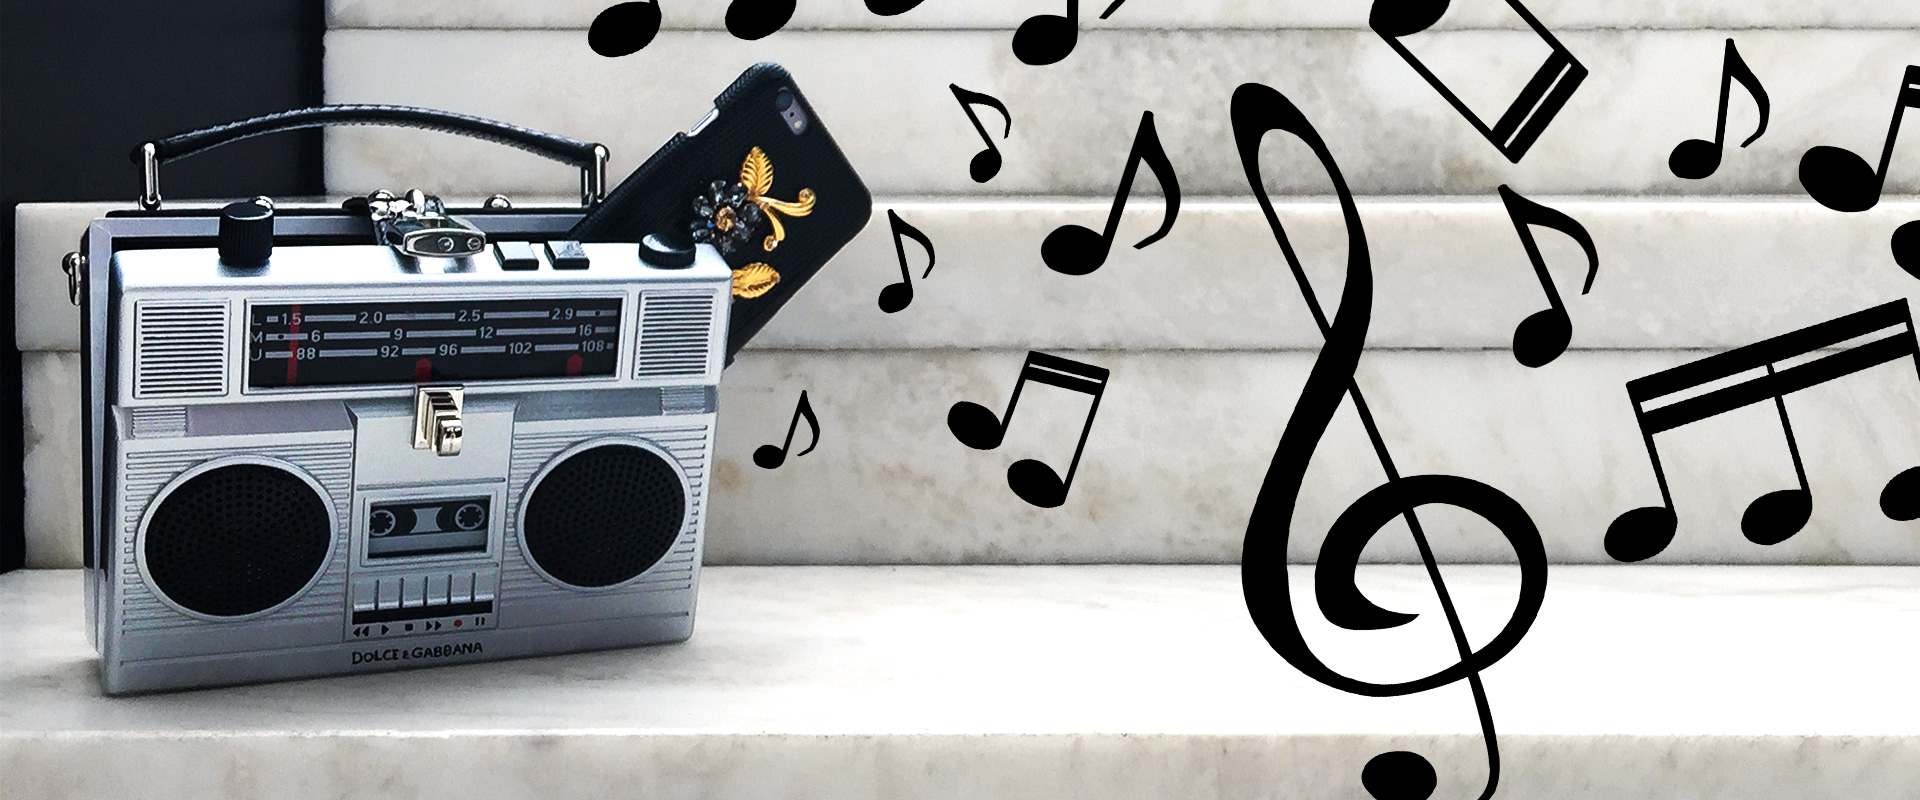 a-brief-history-of-the-boombox-banner_OS